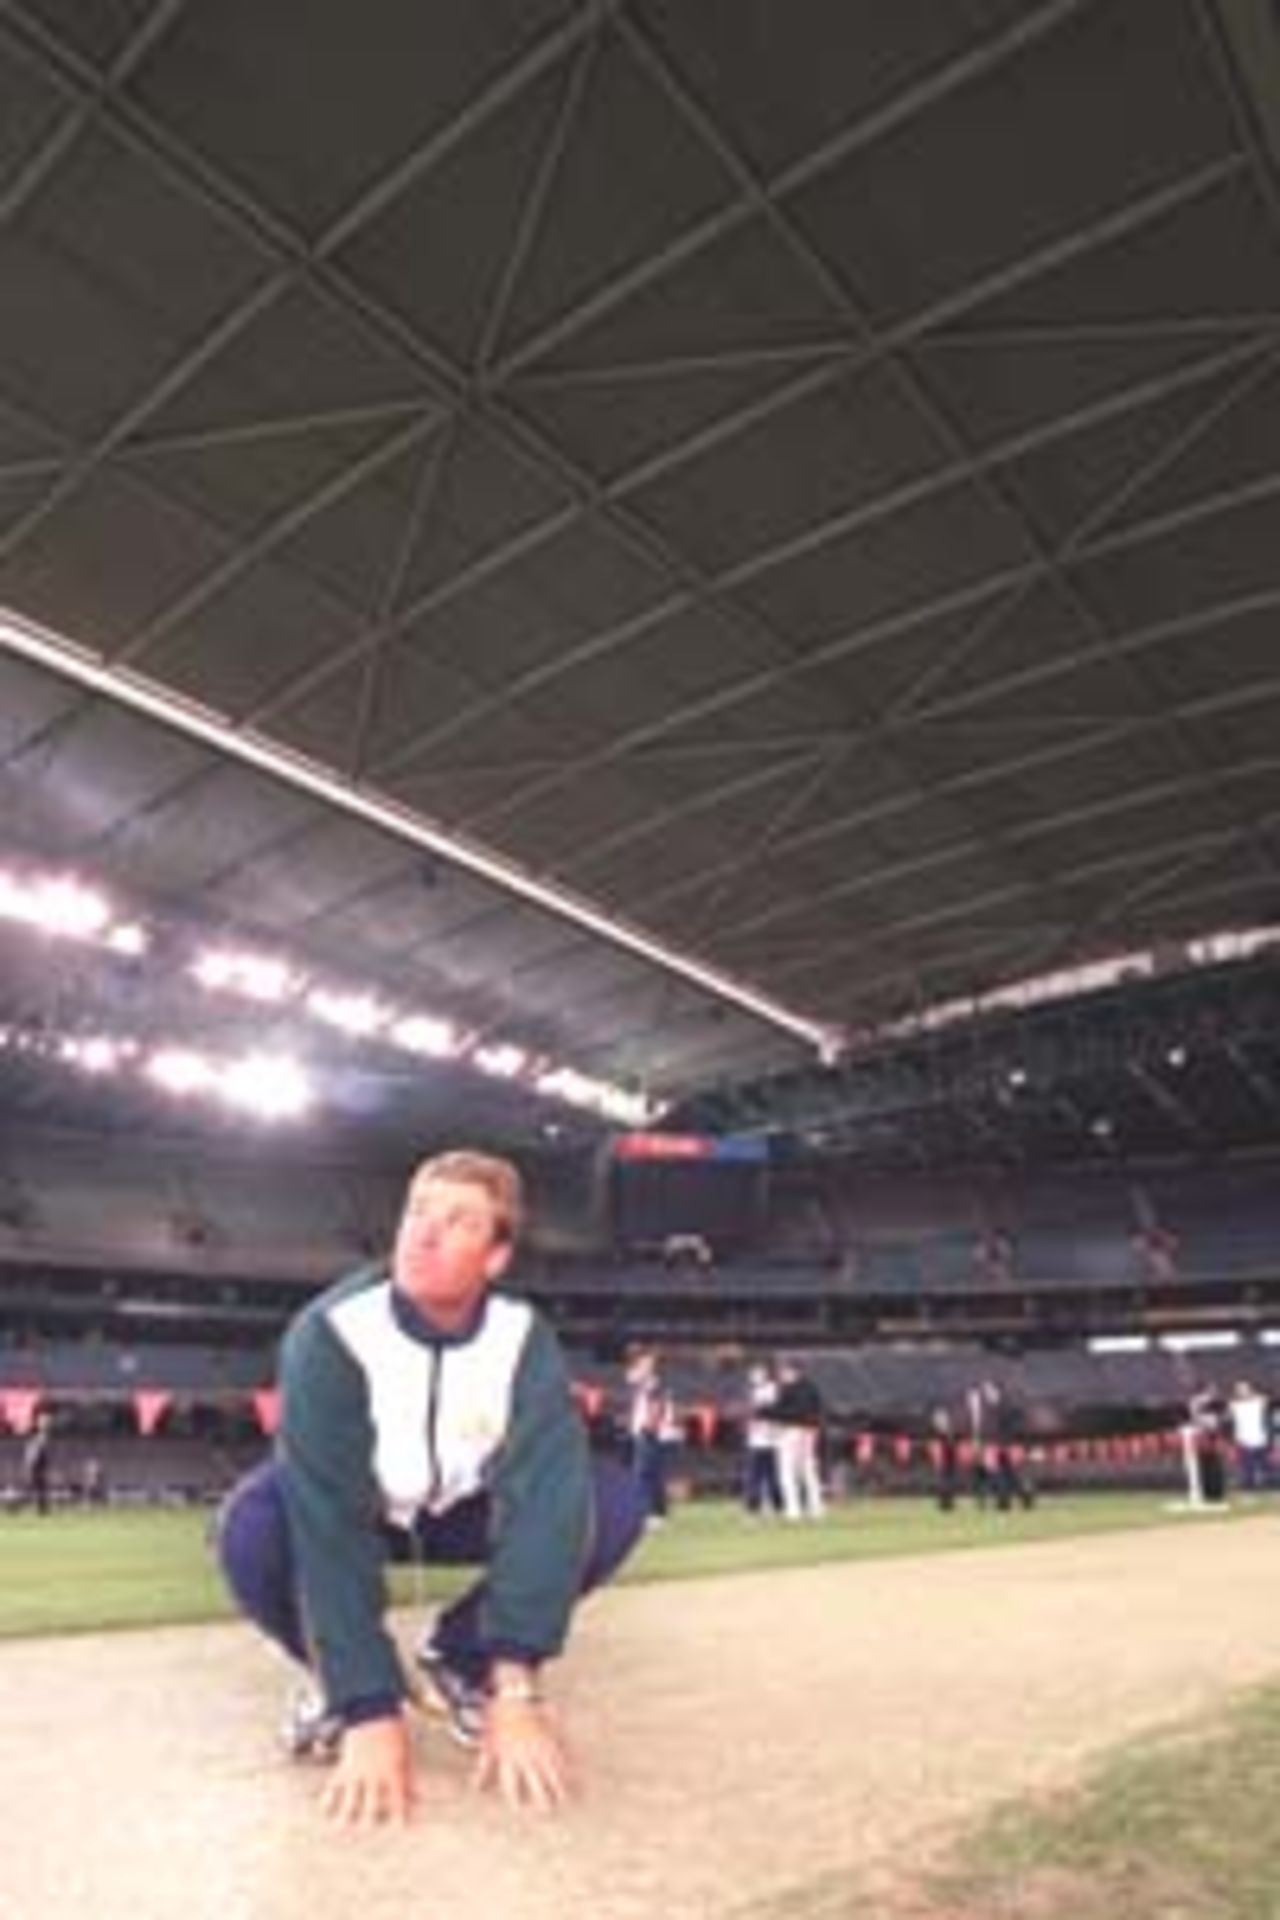 14 Aug 2000: Shane Warne of Australia inspects Colonial Stadium, venue for the Super Challenge 2000 one day cricket series beginning Wednesday in Melbourne, Australia.